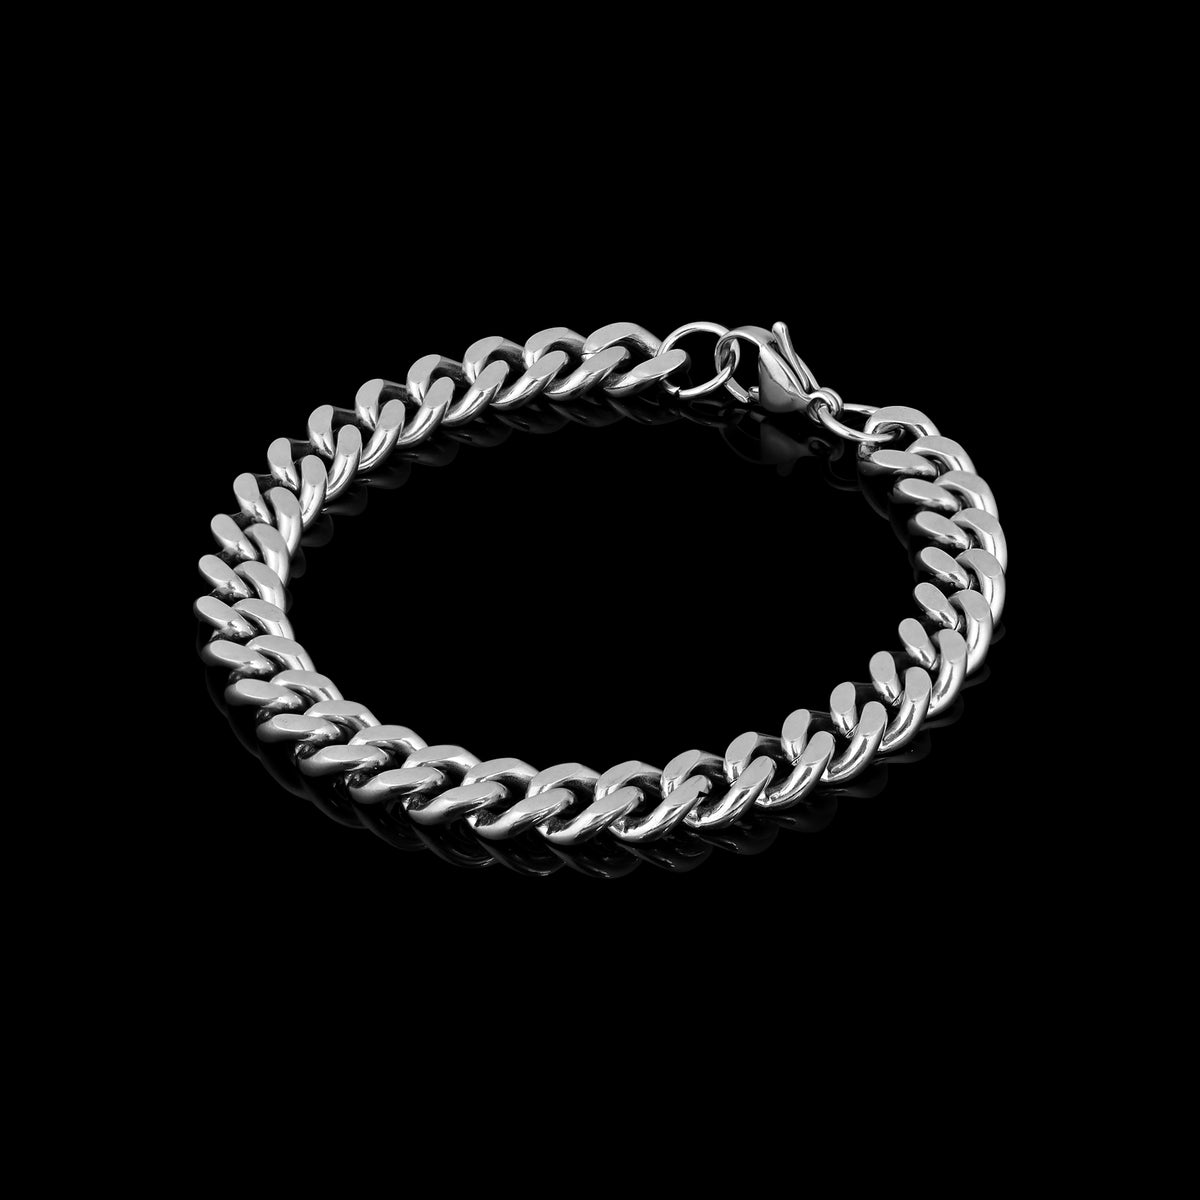 2mm Stainless Steel Diamond Cut Curb Permanent Jewelry Chain By The Fo